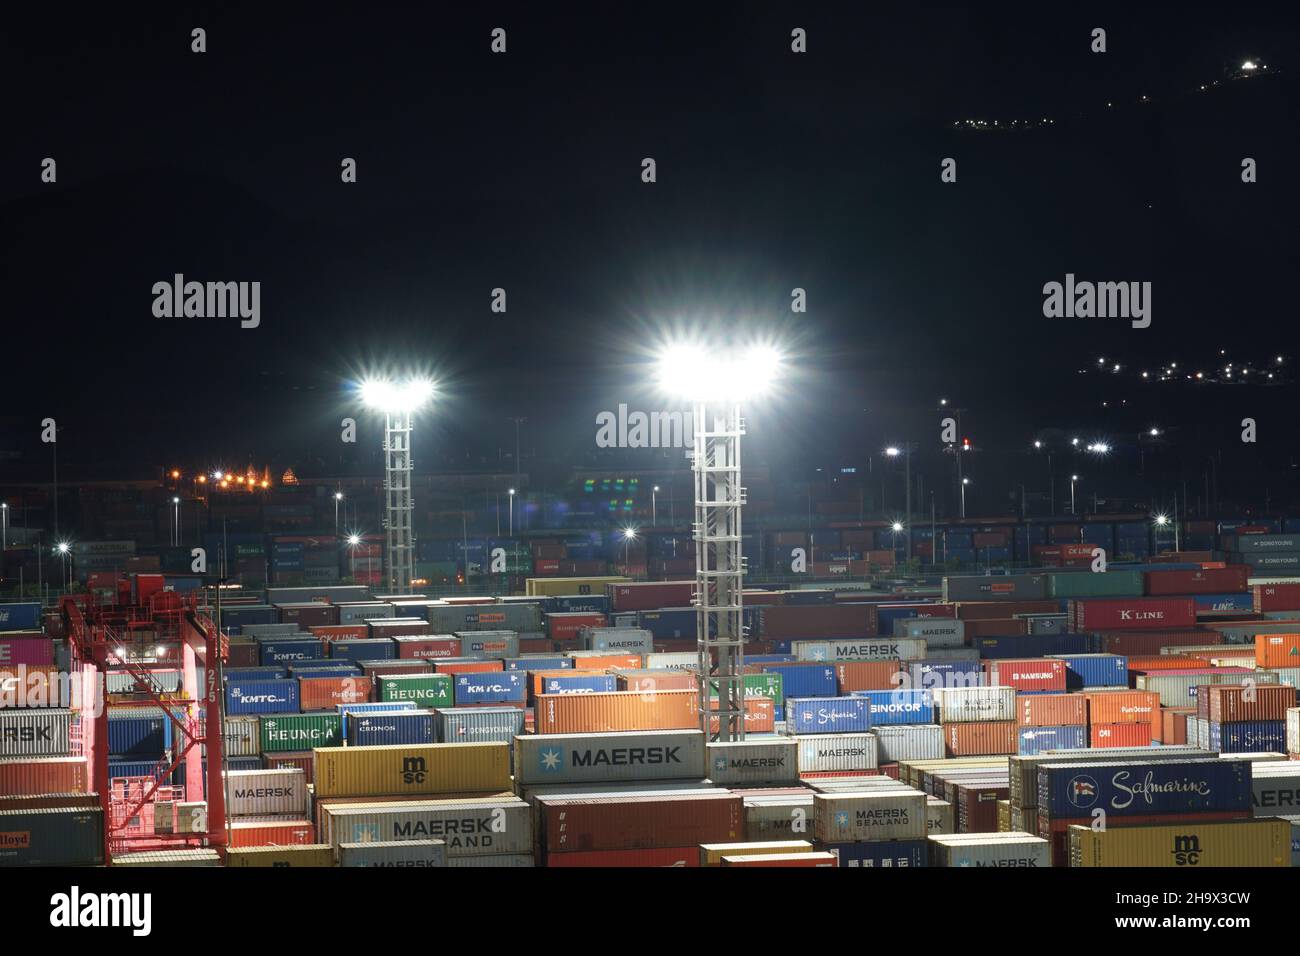 Plenty stowed containers from different shippers observed  during the night. Stock Photo